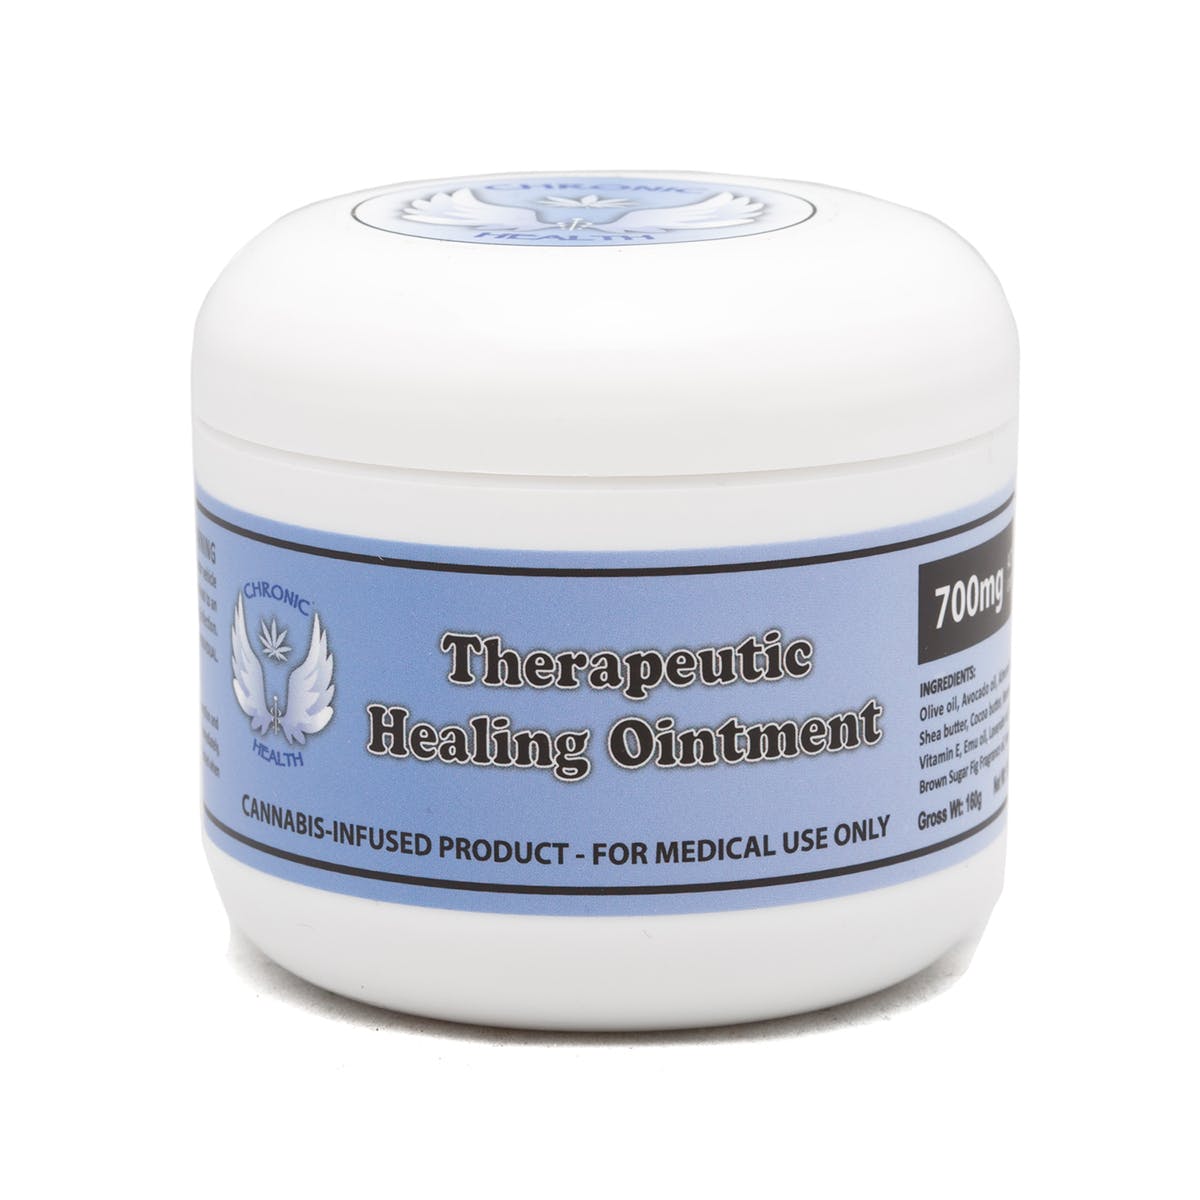 Therapeutic Healing Ointment 700mg